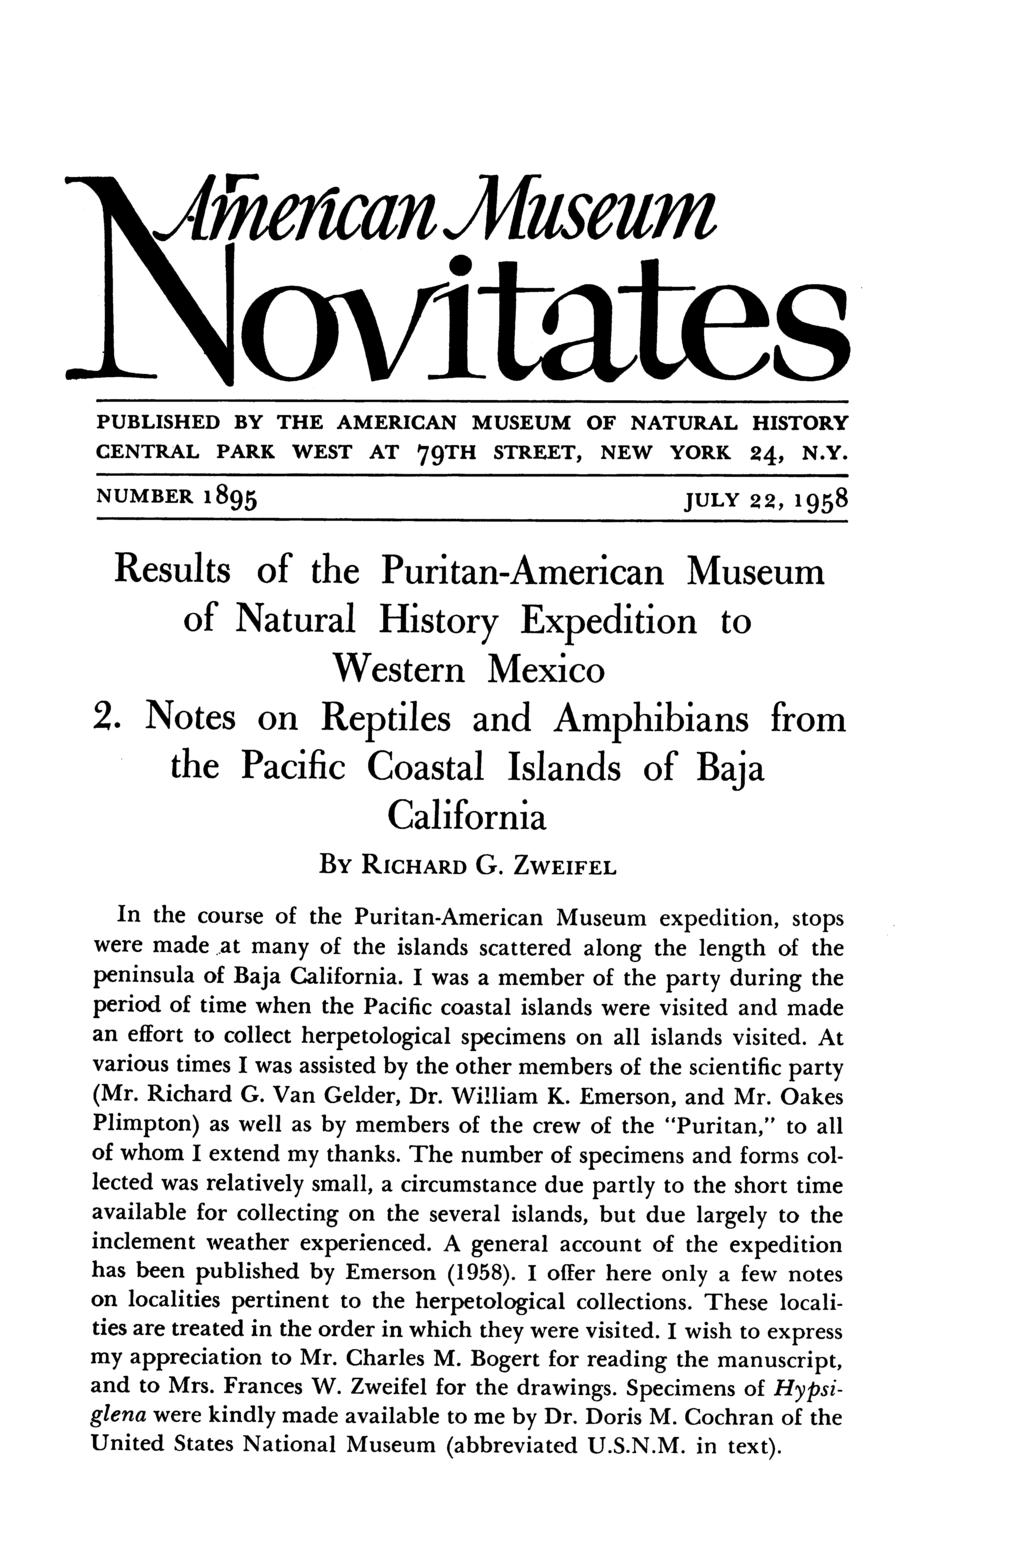 n >kziuianjluseum PUBLISHED BY THE AMERICAN MUSEUM OF NATURAL HISTORY CENTRAL PARK WEST AT 79TH STREET, NEW YORK 24, N.Y. NUMBER 1895 JULY 22, 1958 Results of the Puritan-American Museum of Natural History Expedition to Western Mexico 2.